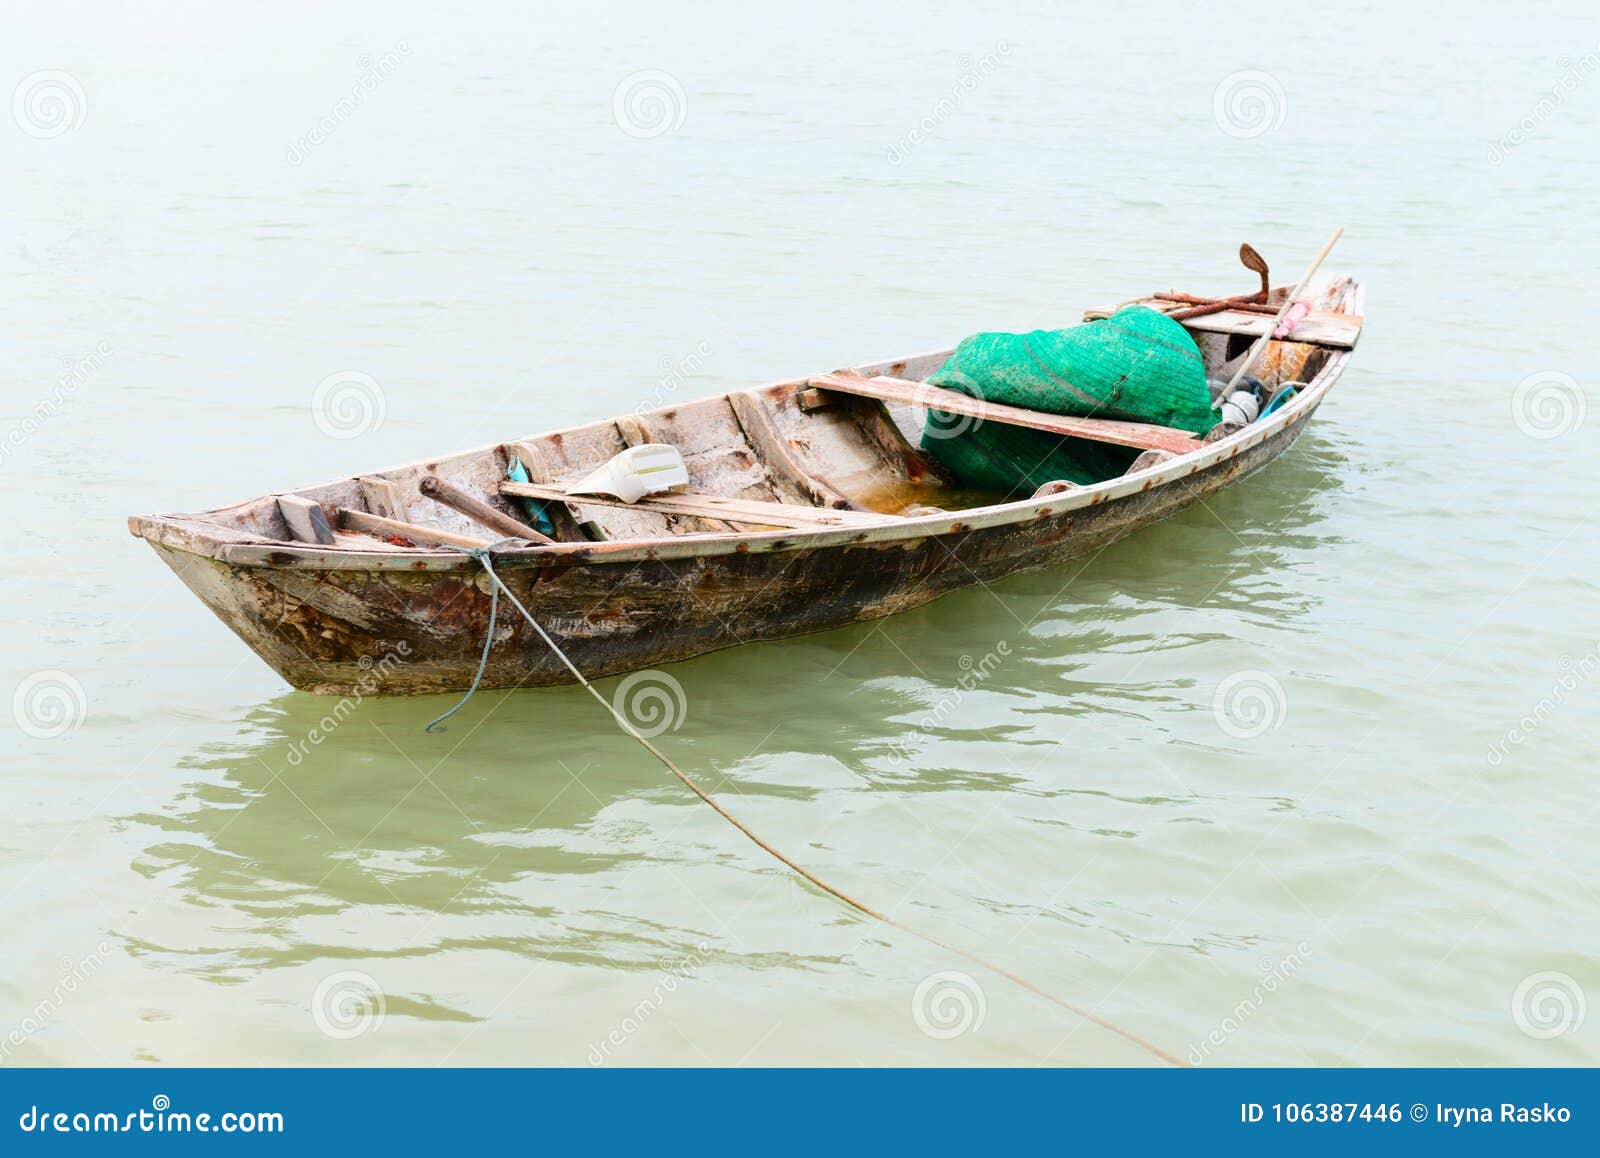 Small wooden fishing boat stock photo. Image of transportation - 106387446